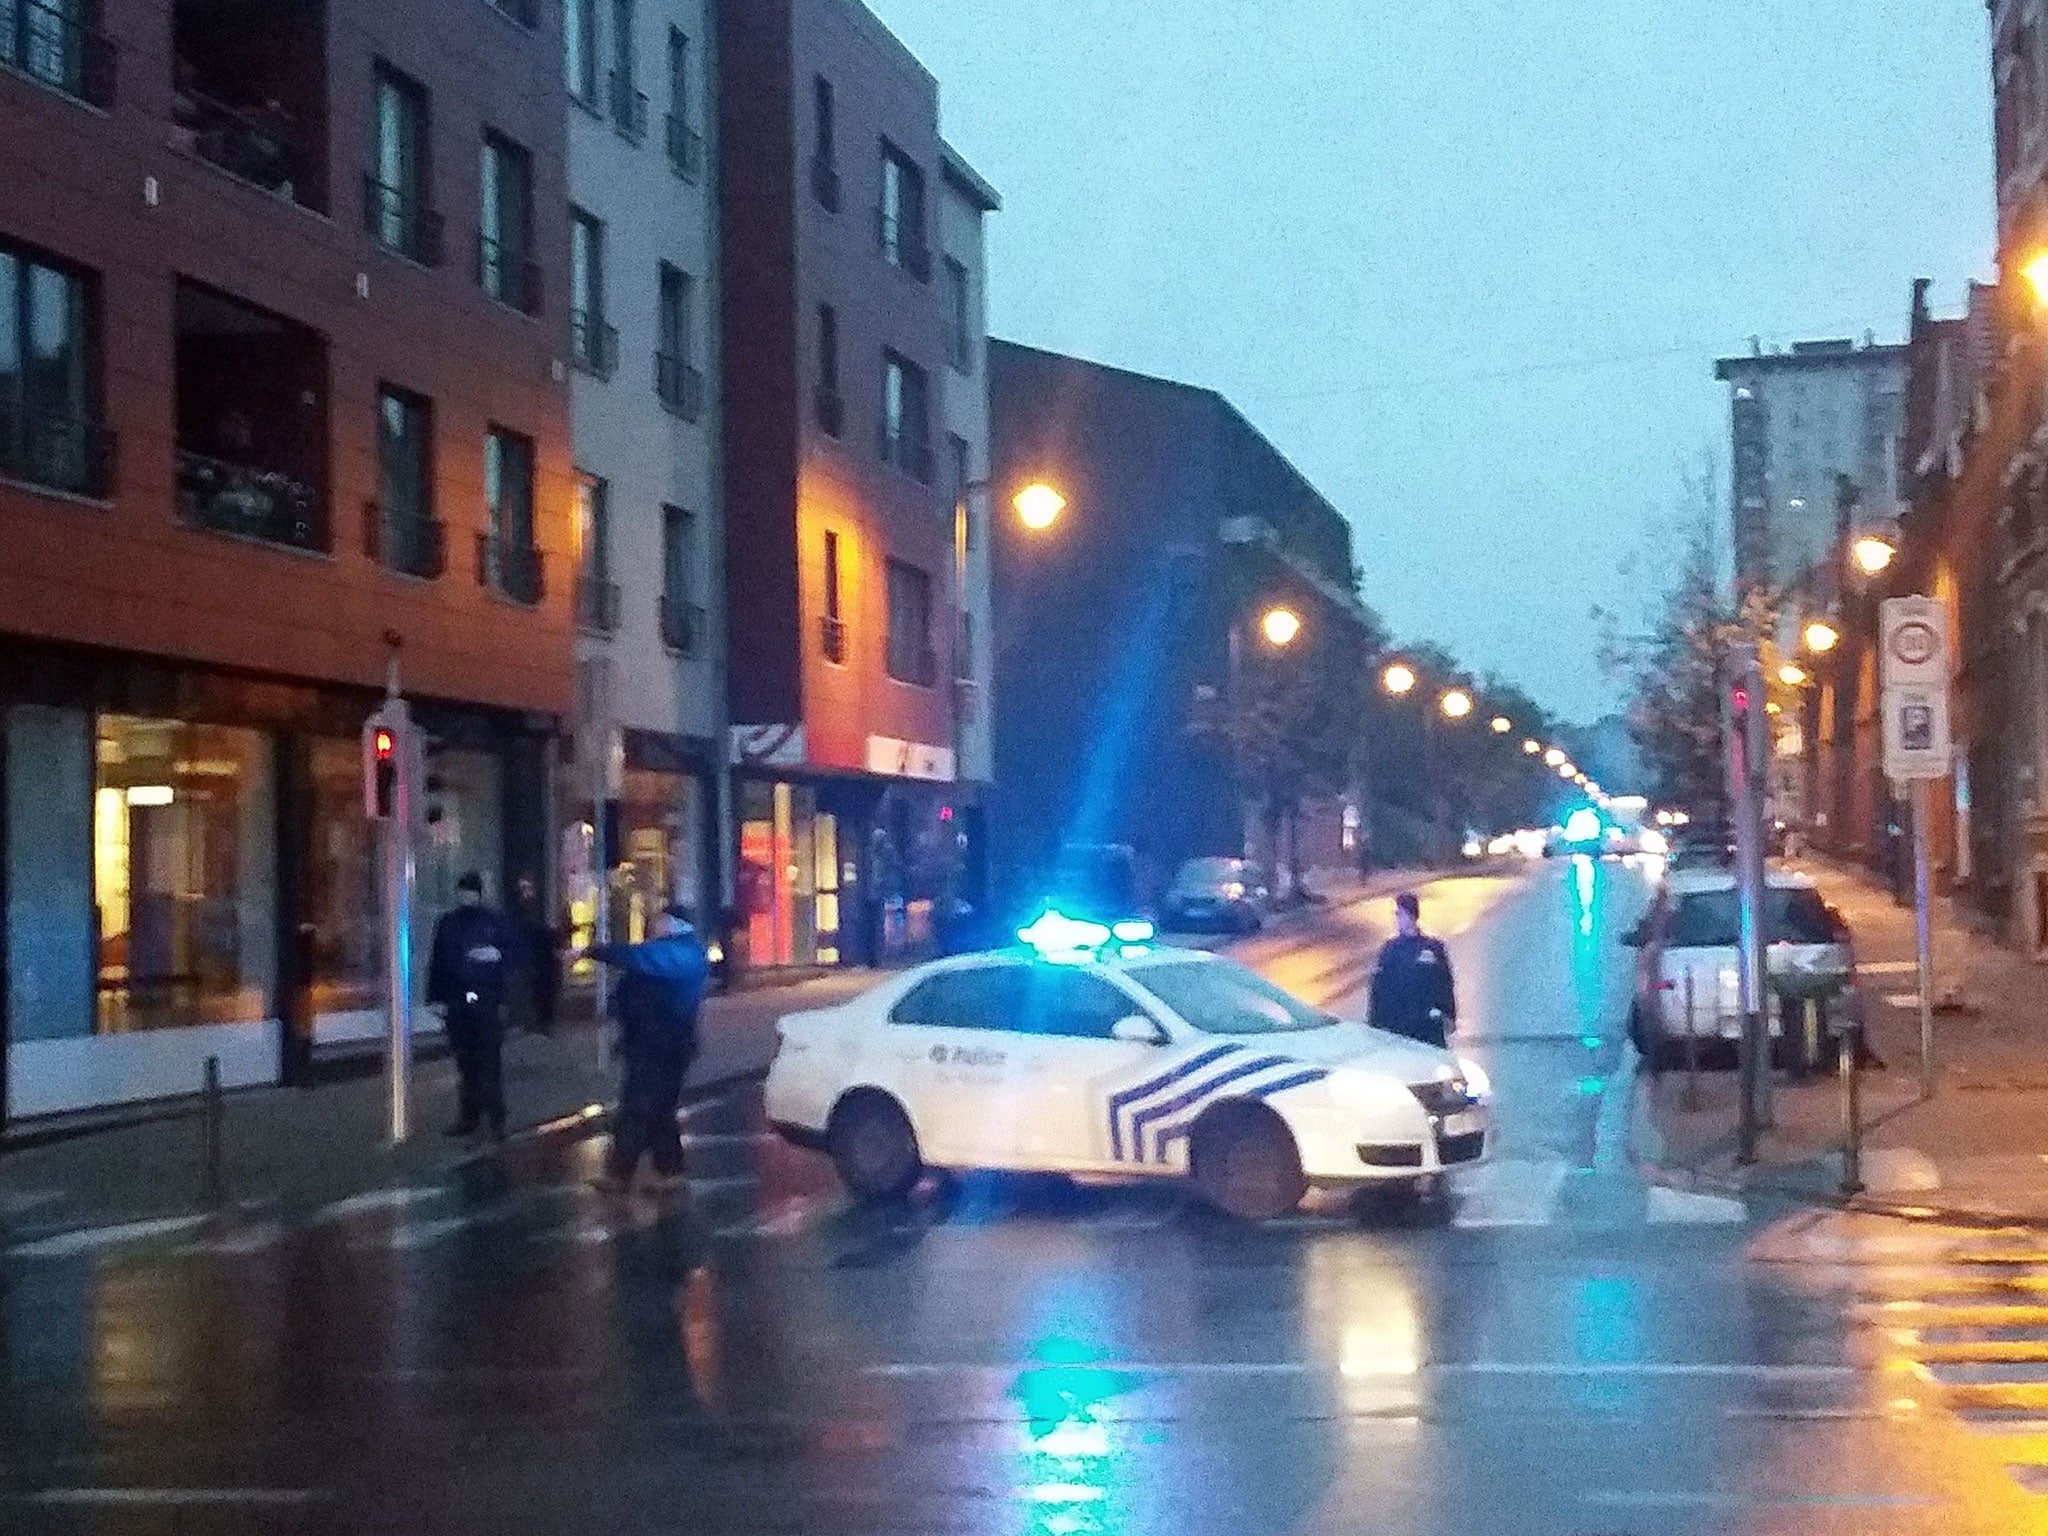 Belgian police blocking a street during a police raid in connection with the attacks in Paris, in Brussels' Molenbeek district on 14 November